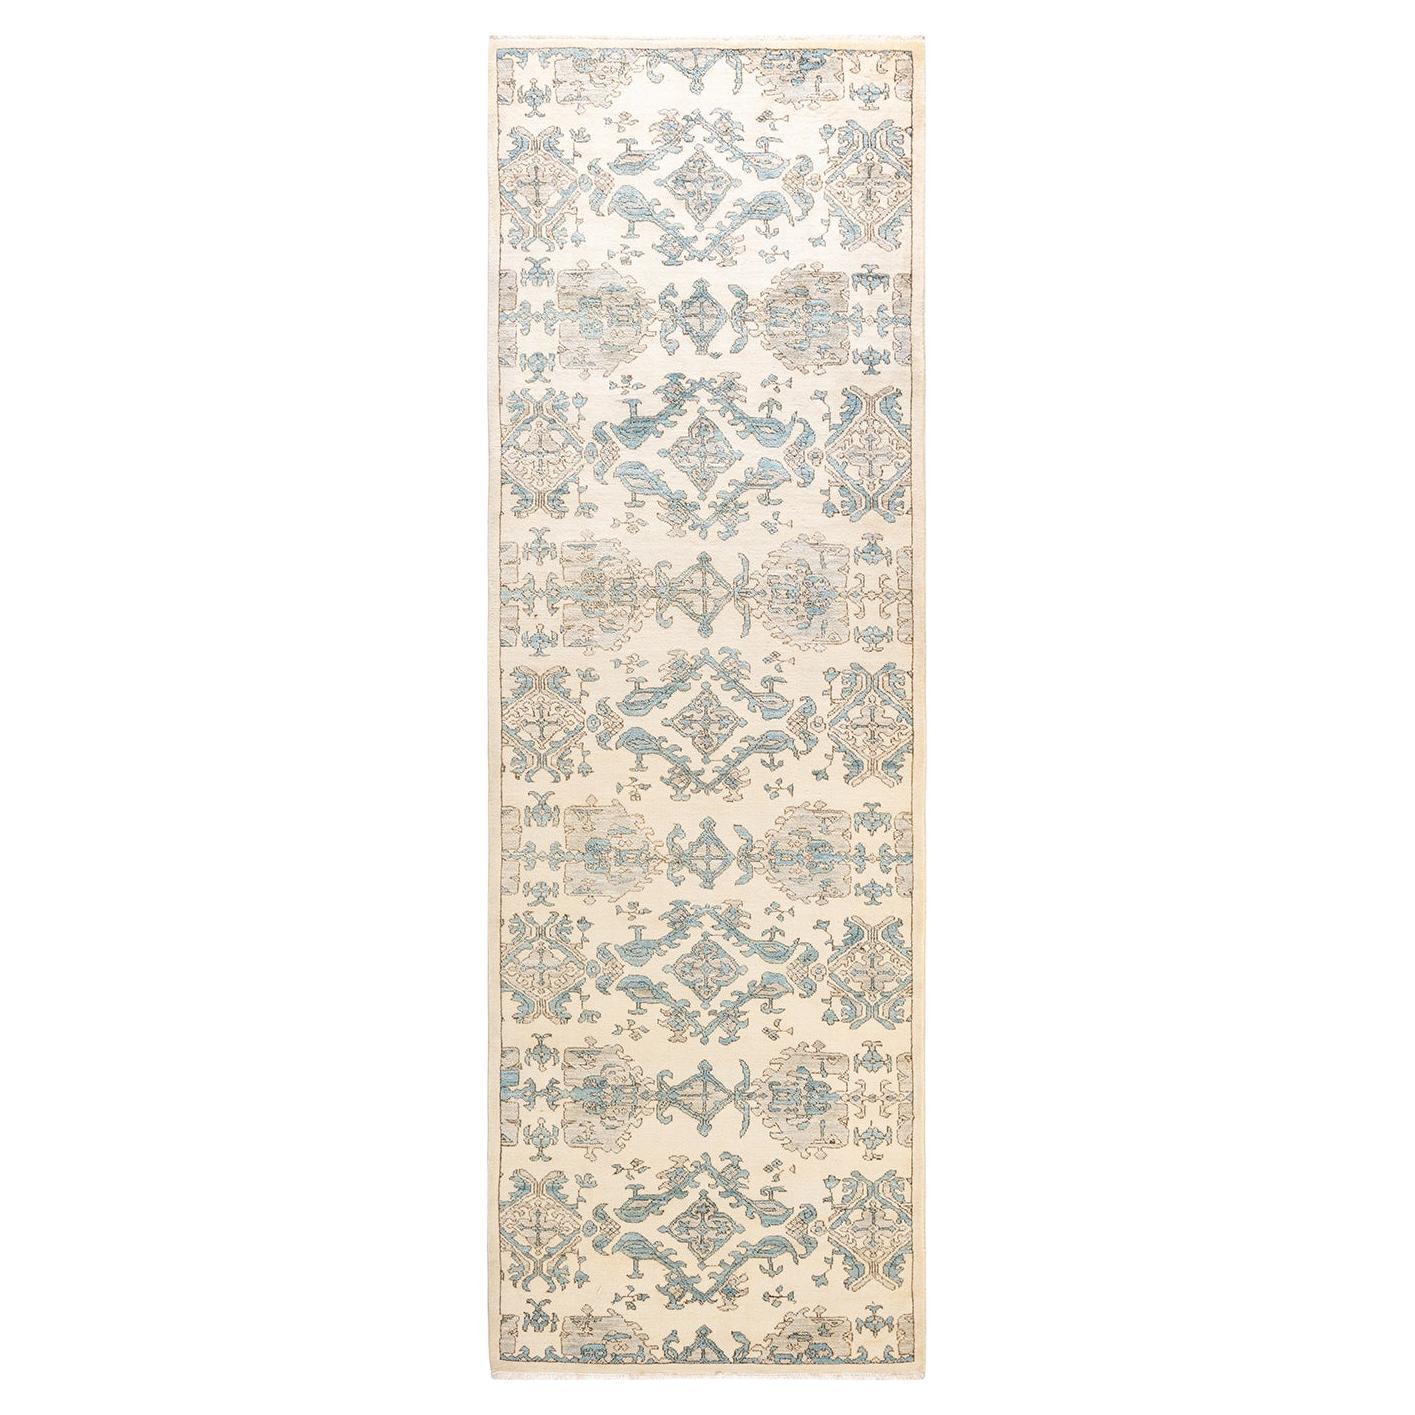 One-of-a-kind Hand Knotted Wool Eclectic Ivory Area Rug